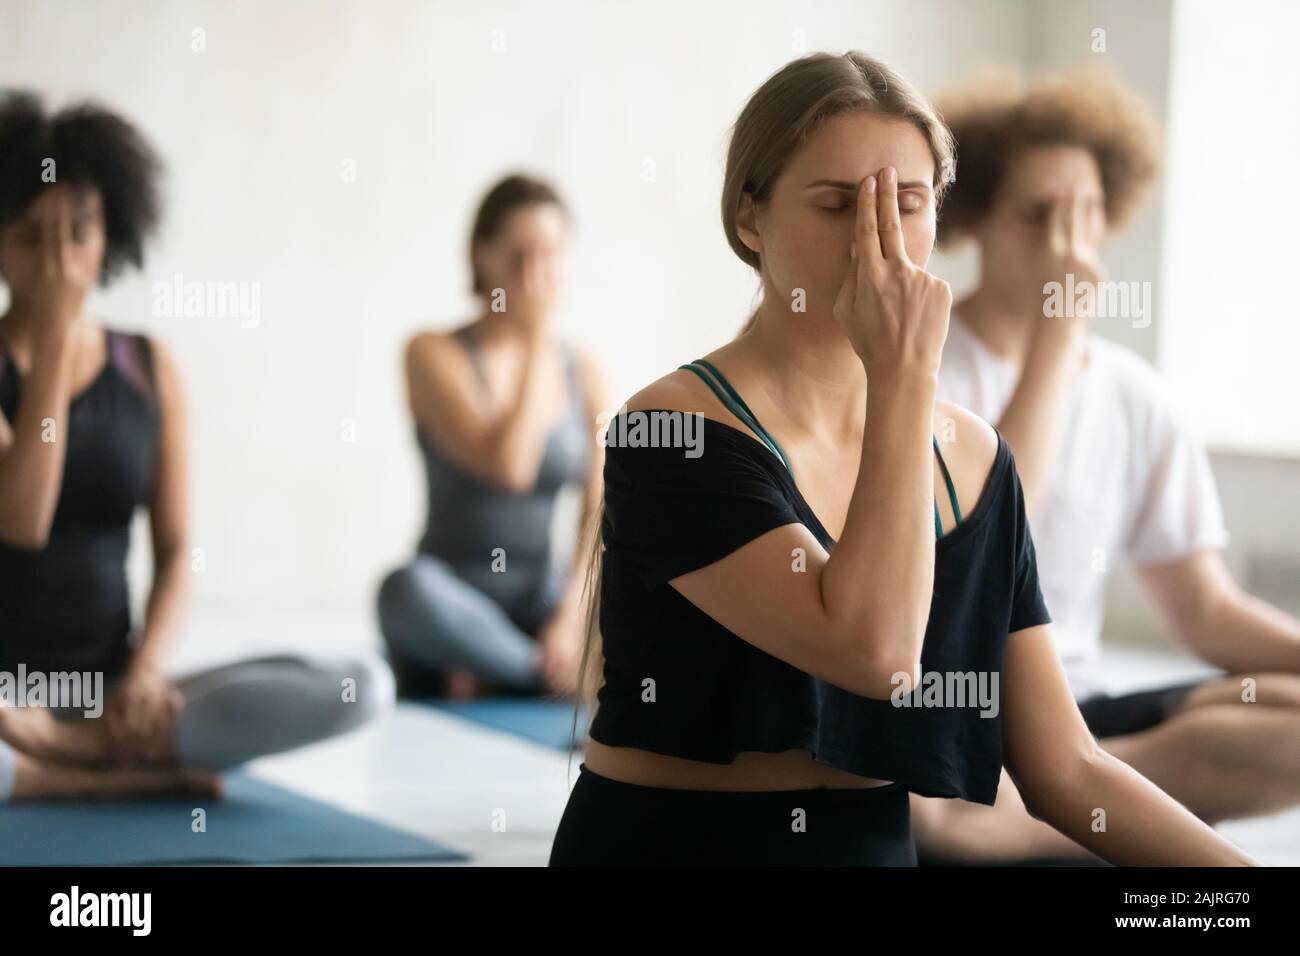 Woman doing Alternate Nostril Breathing exercise close up, practicing yoga Stock Photo